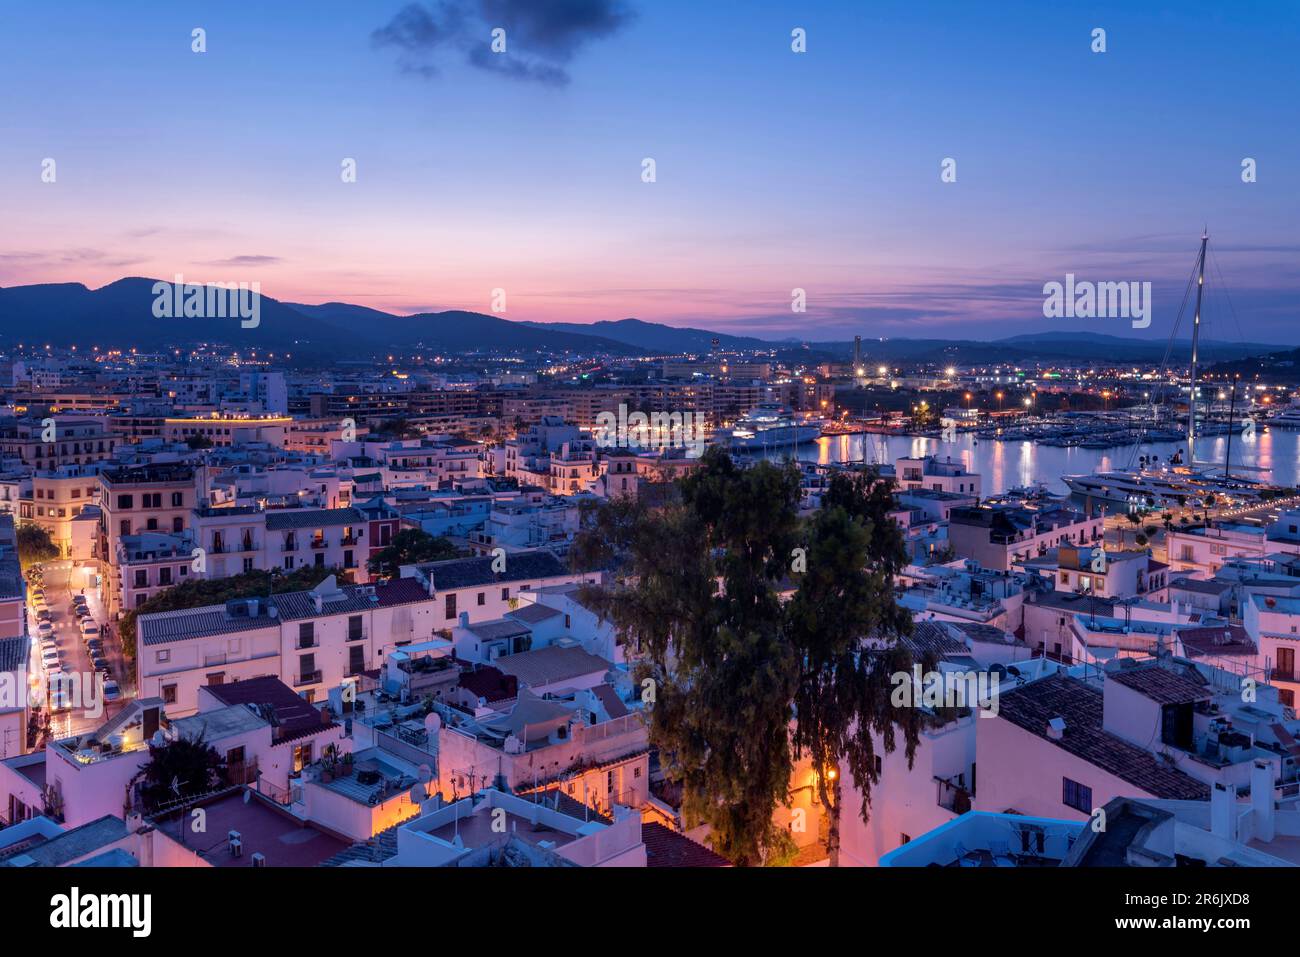 HARBOUR OLD TOWN IBIZA BALEARIC ISLANDS SPAIN Stock Photo